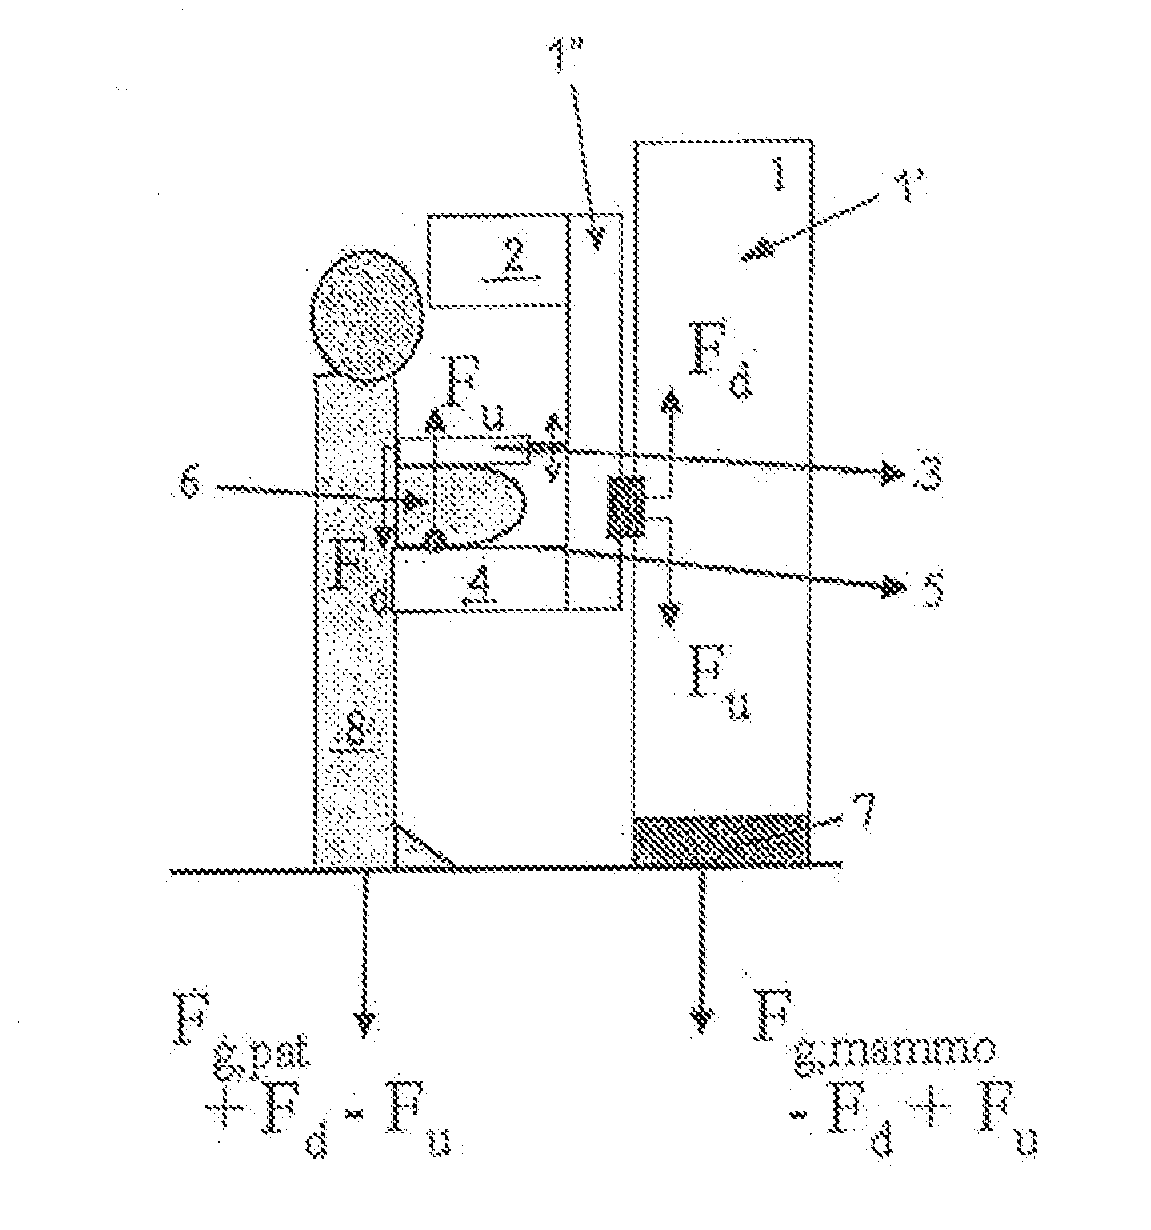 Mammography Apparatus and Method to Adjust or Tune the Mechanical Settings of Such a Mammography Apparatus